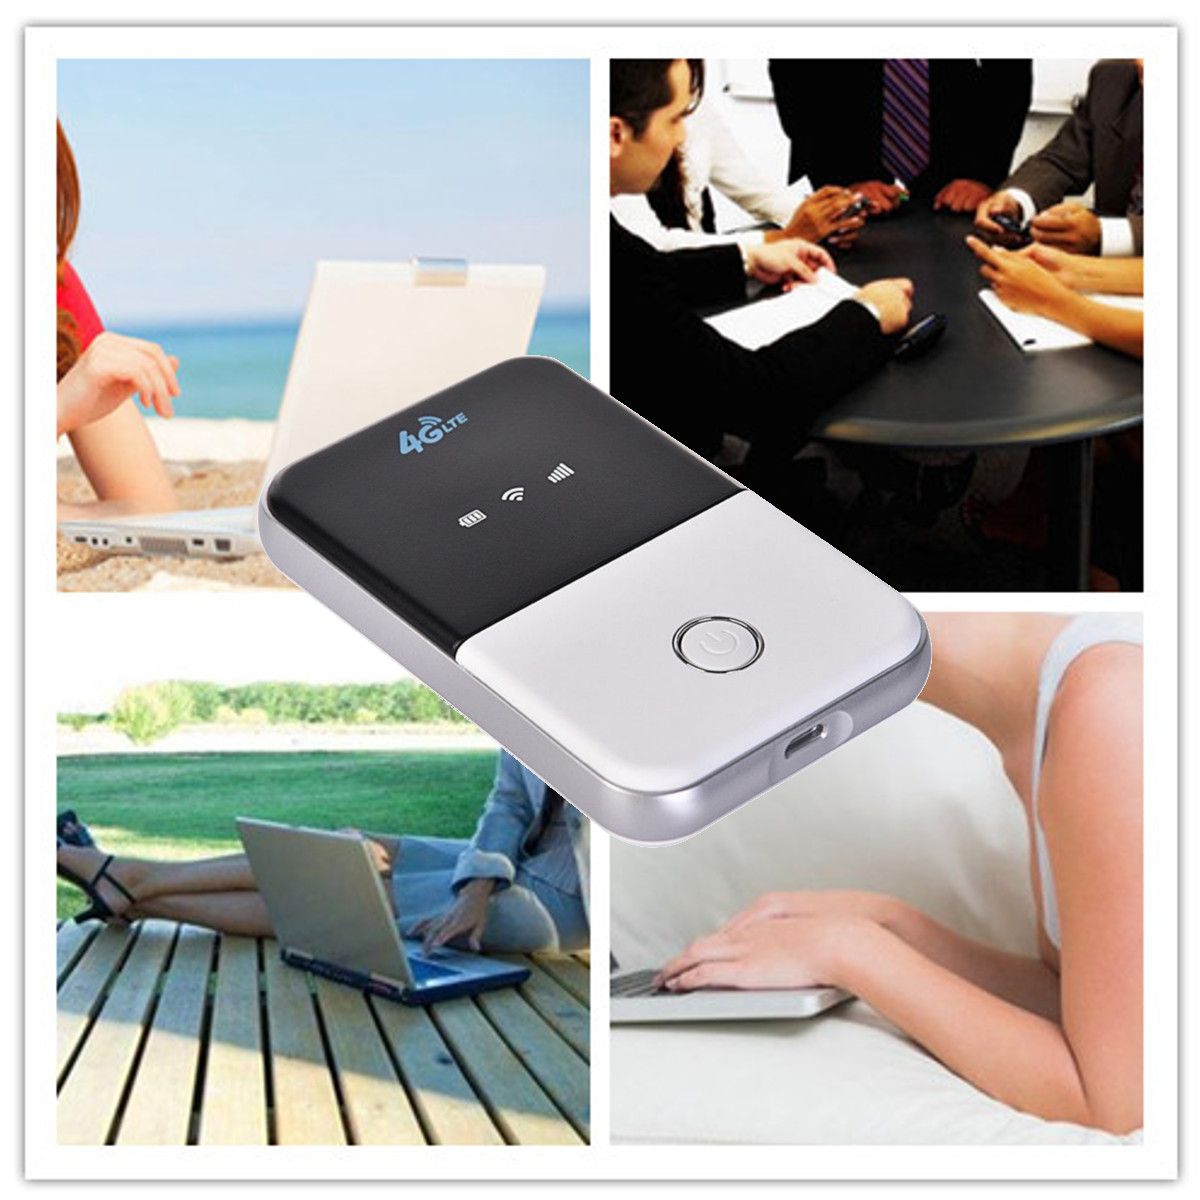 Portable-3G-4G-Router-LTE-4G-Wireless-Router-Mobile-Wifi-Hotspot-SIM-Card-Slot-for-Mobile-Phone-1215362